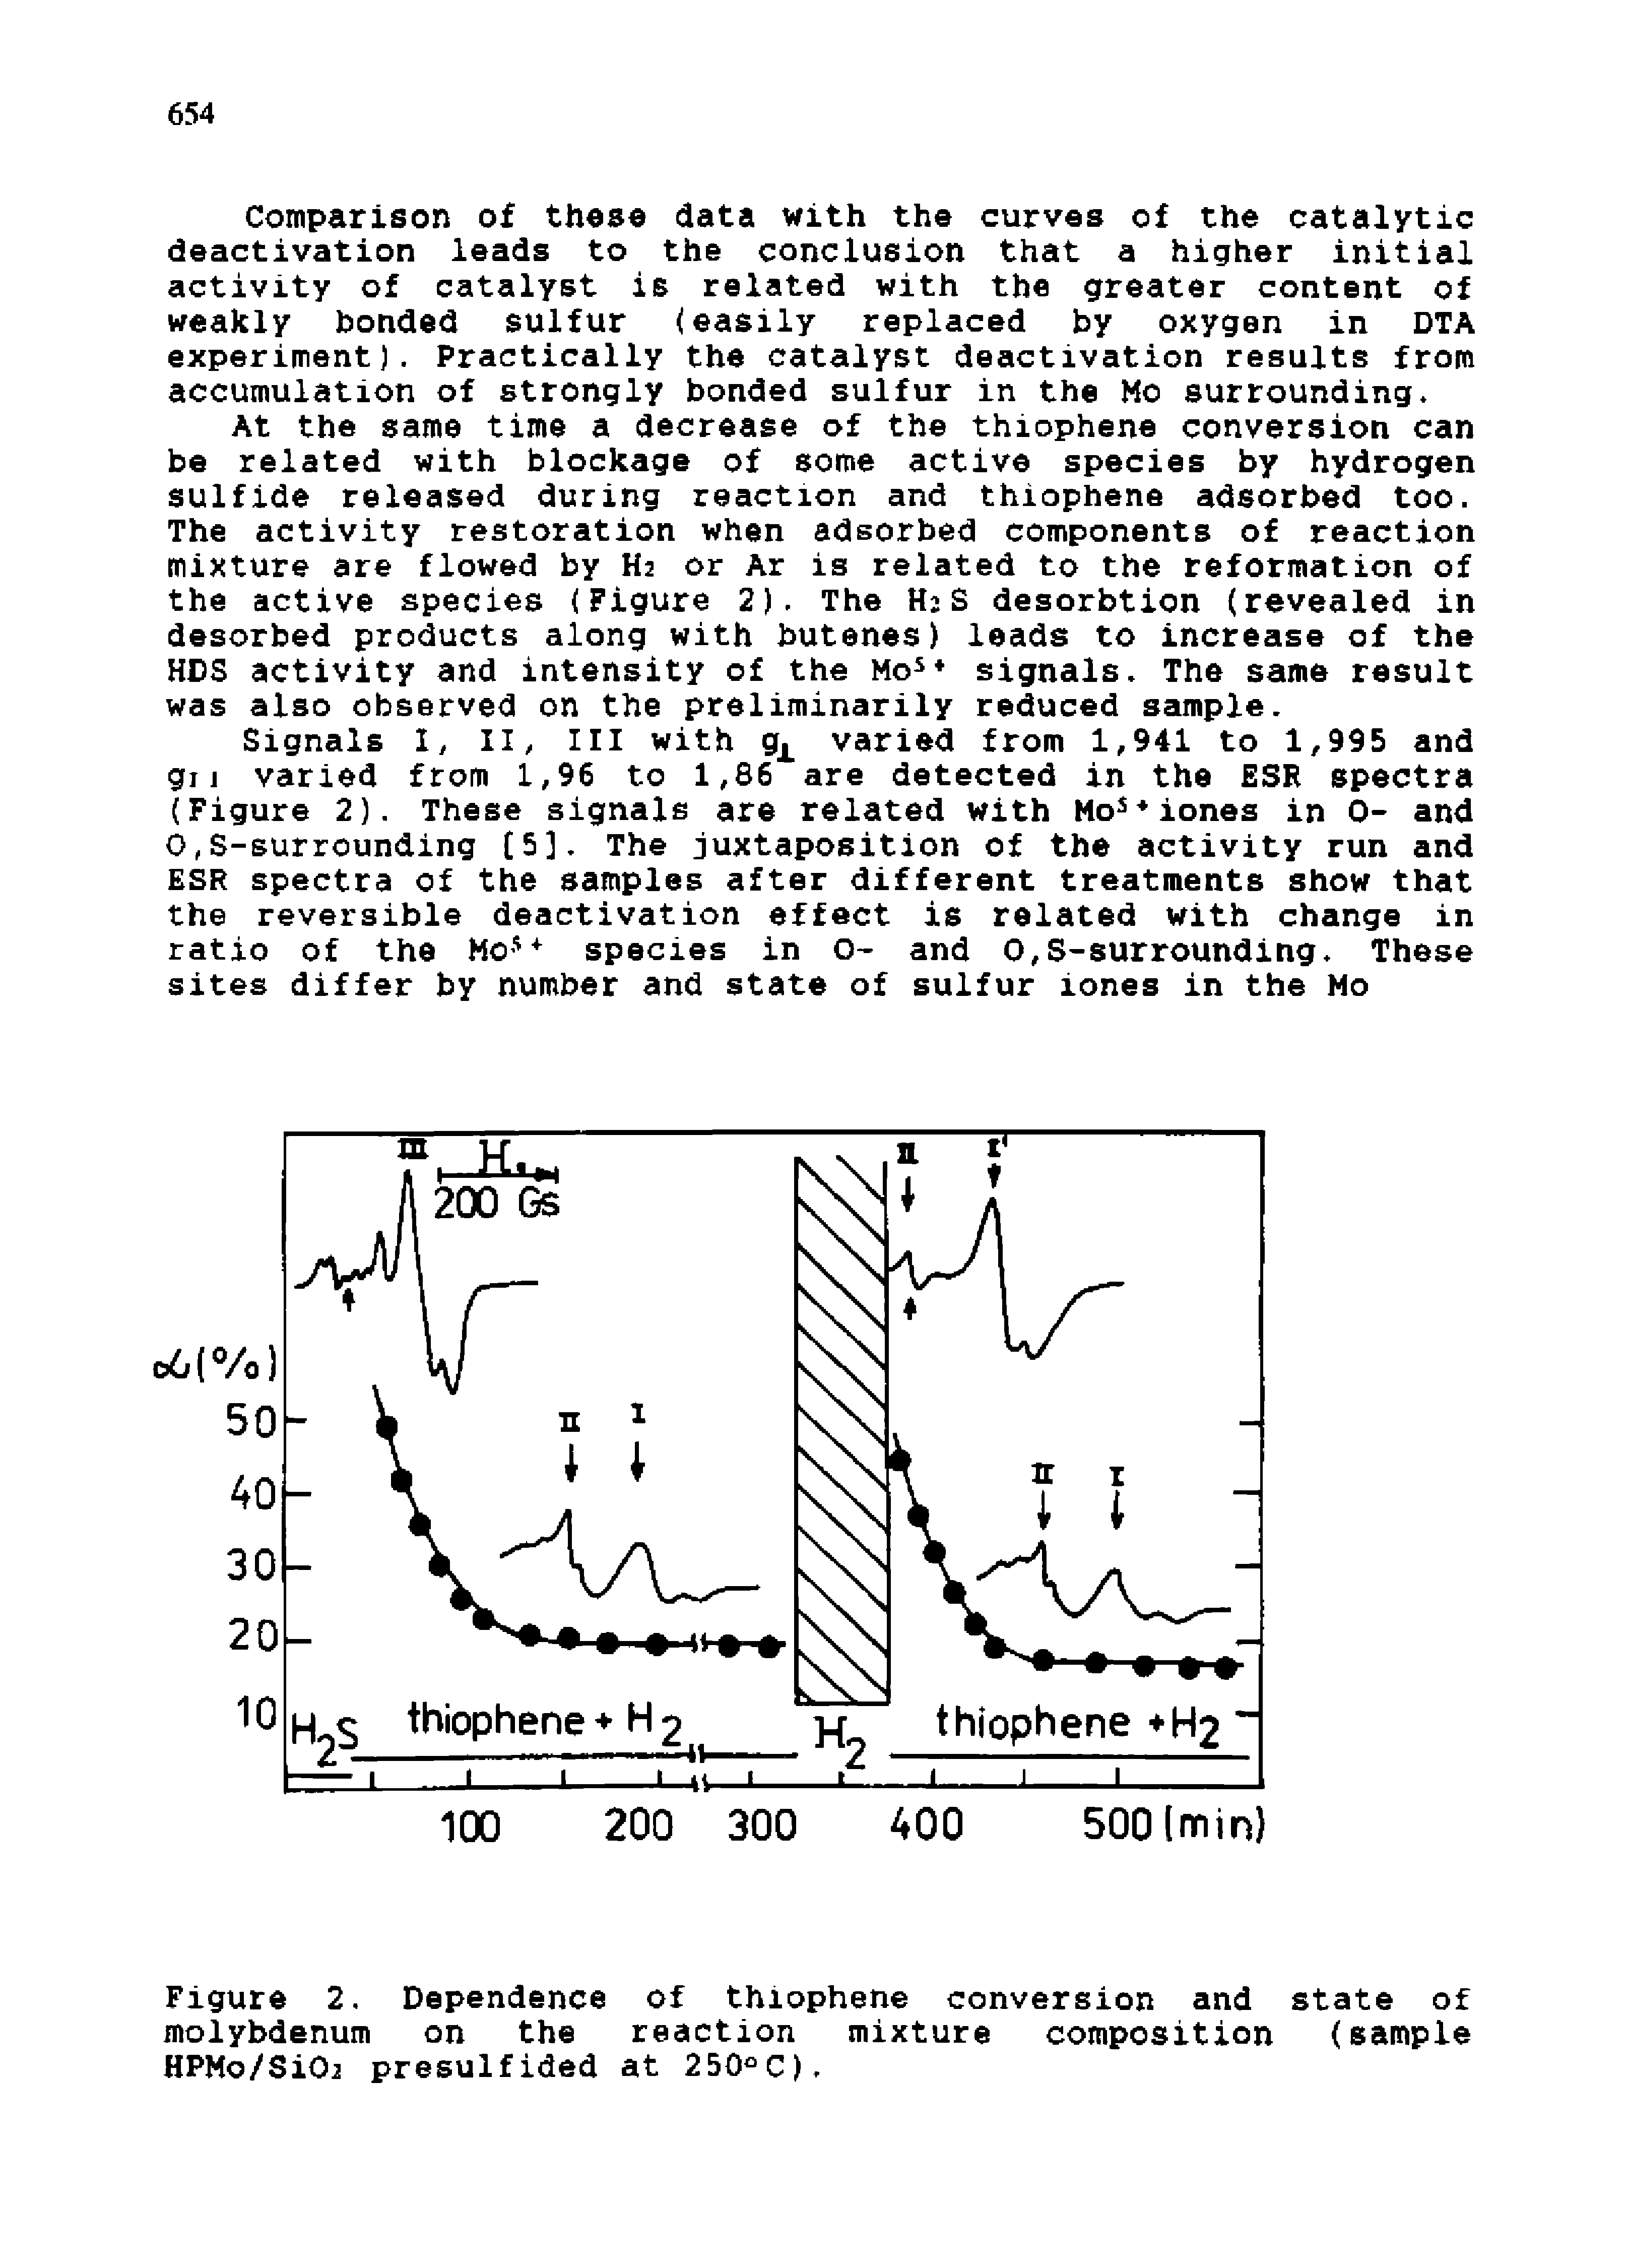 Figure 2, Dependence of thiophene conversion and state of molybdenum on the reaction mixture composition (sample HPM0/S1O2 presulfided at 250°C),...